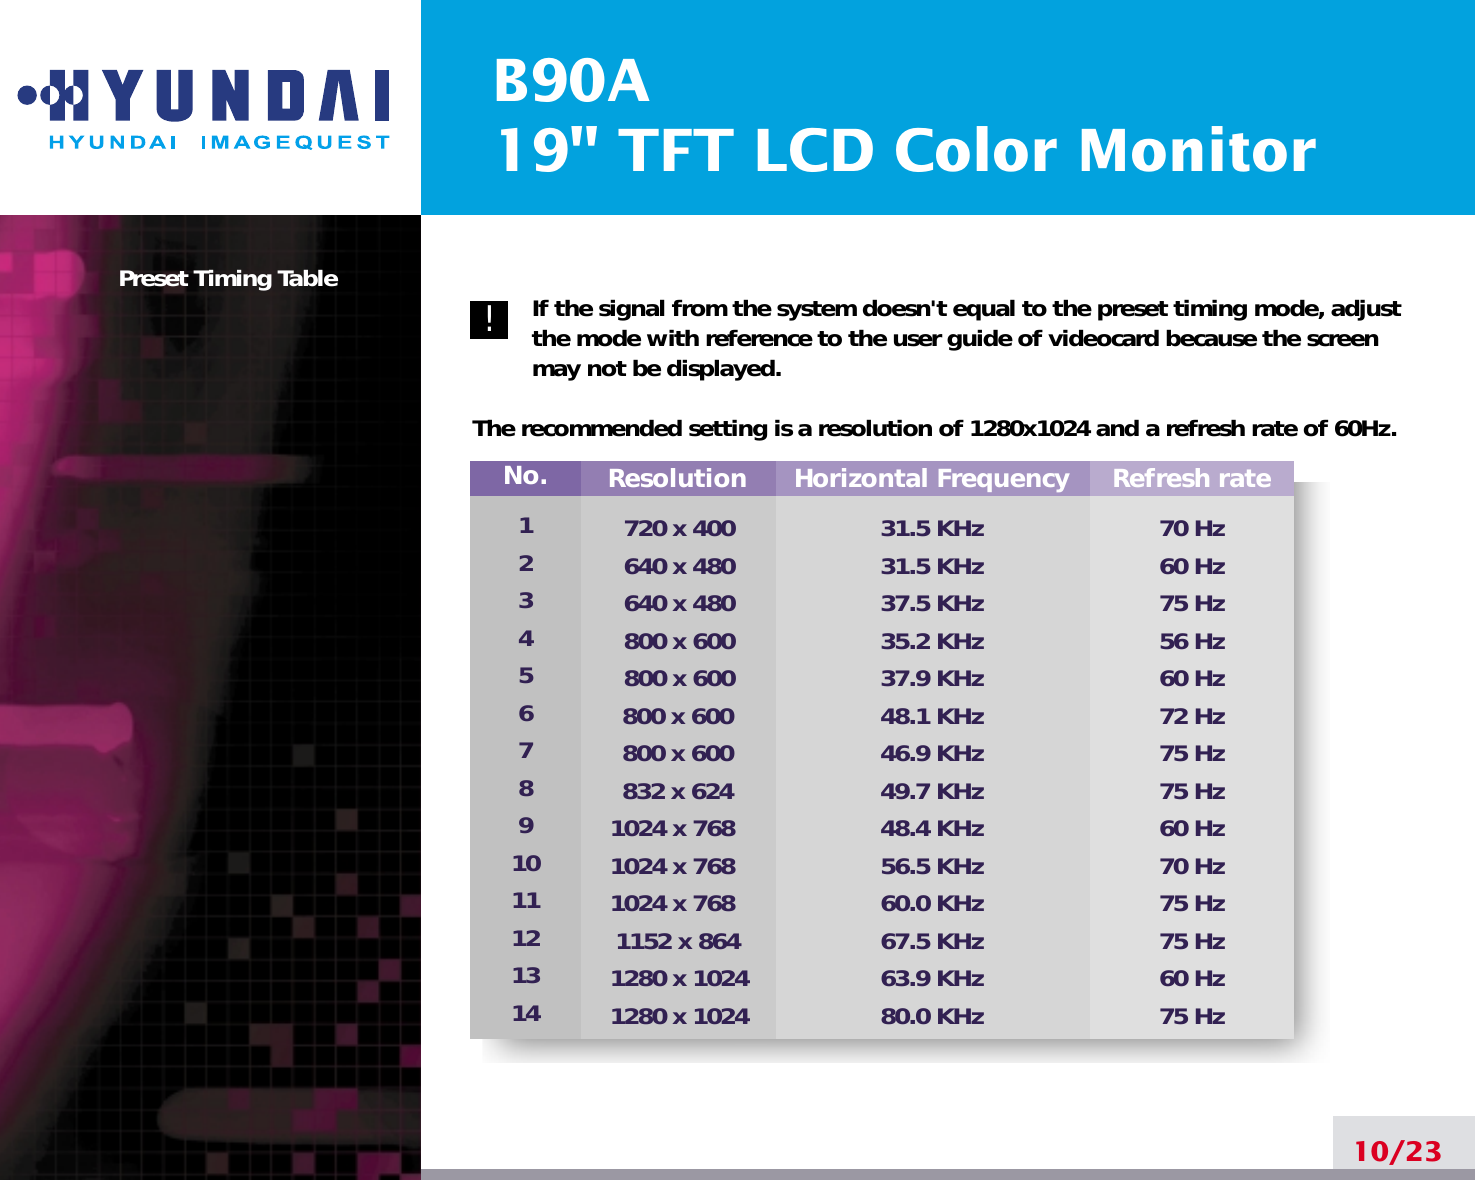 B90A19&quot; TFT LCD Color MonitorPreset Timing Table If the signal from the system doesn&apos;t equal to the preset timing mode, adjustthe mode with reference to the user guide of videocard because the screenmay not be displayed.The recommended setting is a resolution of 1280x1024 and a refresh rate of 60Hz.10/23No.1234567891011121314Resolution720 x 400640 x 480640 x 480 800 x 600800 x 600800 x 600800 x 600832 x 6241024 x 7681024 x 7681024 x 7681152 x 8641280 x 10241280 x 1024Horizontal Frequency31.5 KHz31.5 KHz37.5 KHz35.2 KHz37.9 KHz48.1 KHz46.9 KHz49.7 KHz48.4 KHz56.5 KHz60.0 KHz67.5 KHz63.9 KHz80.0 KHzRefresh rate70 Hz60 Hz75 Hz56 Hz60 Hz72 Hz75 Hz75 Hz60 Hz70 Hz75 Hz75 Hz60 Hz75 Hz!